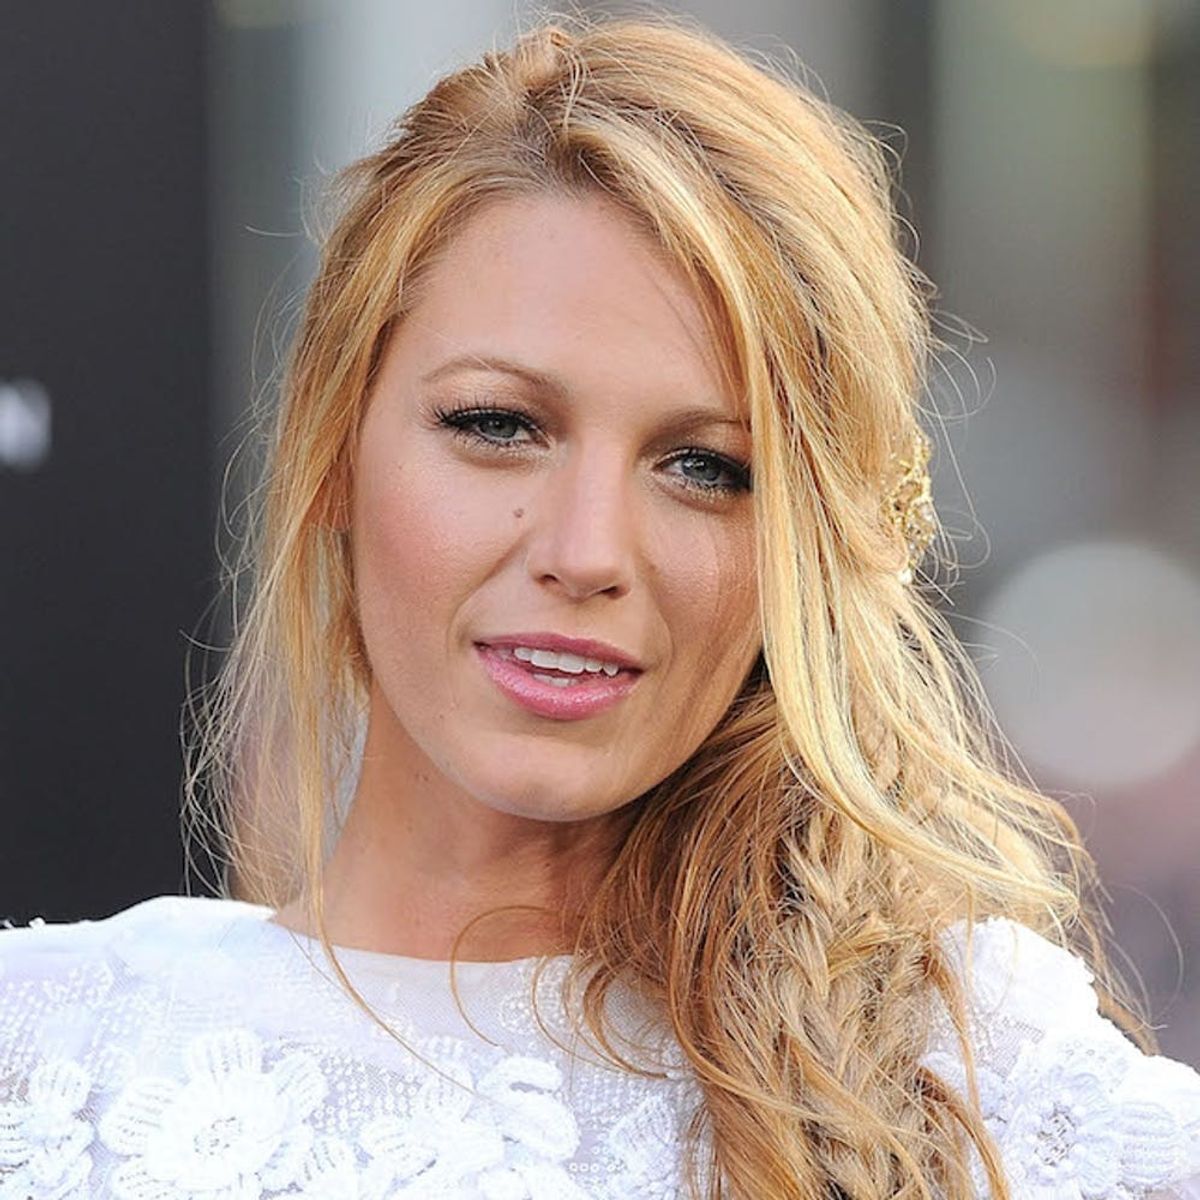 Blake Lively’s Totally Unexpected Styling Hack Will Save You on Chilly Evenings